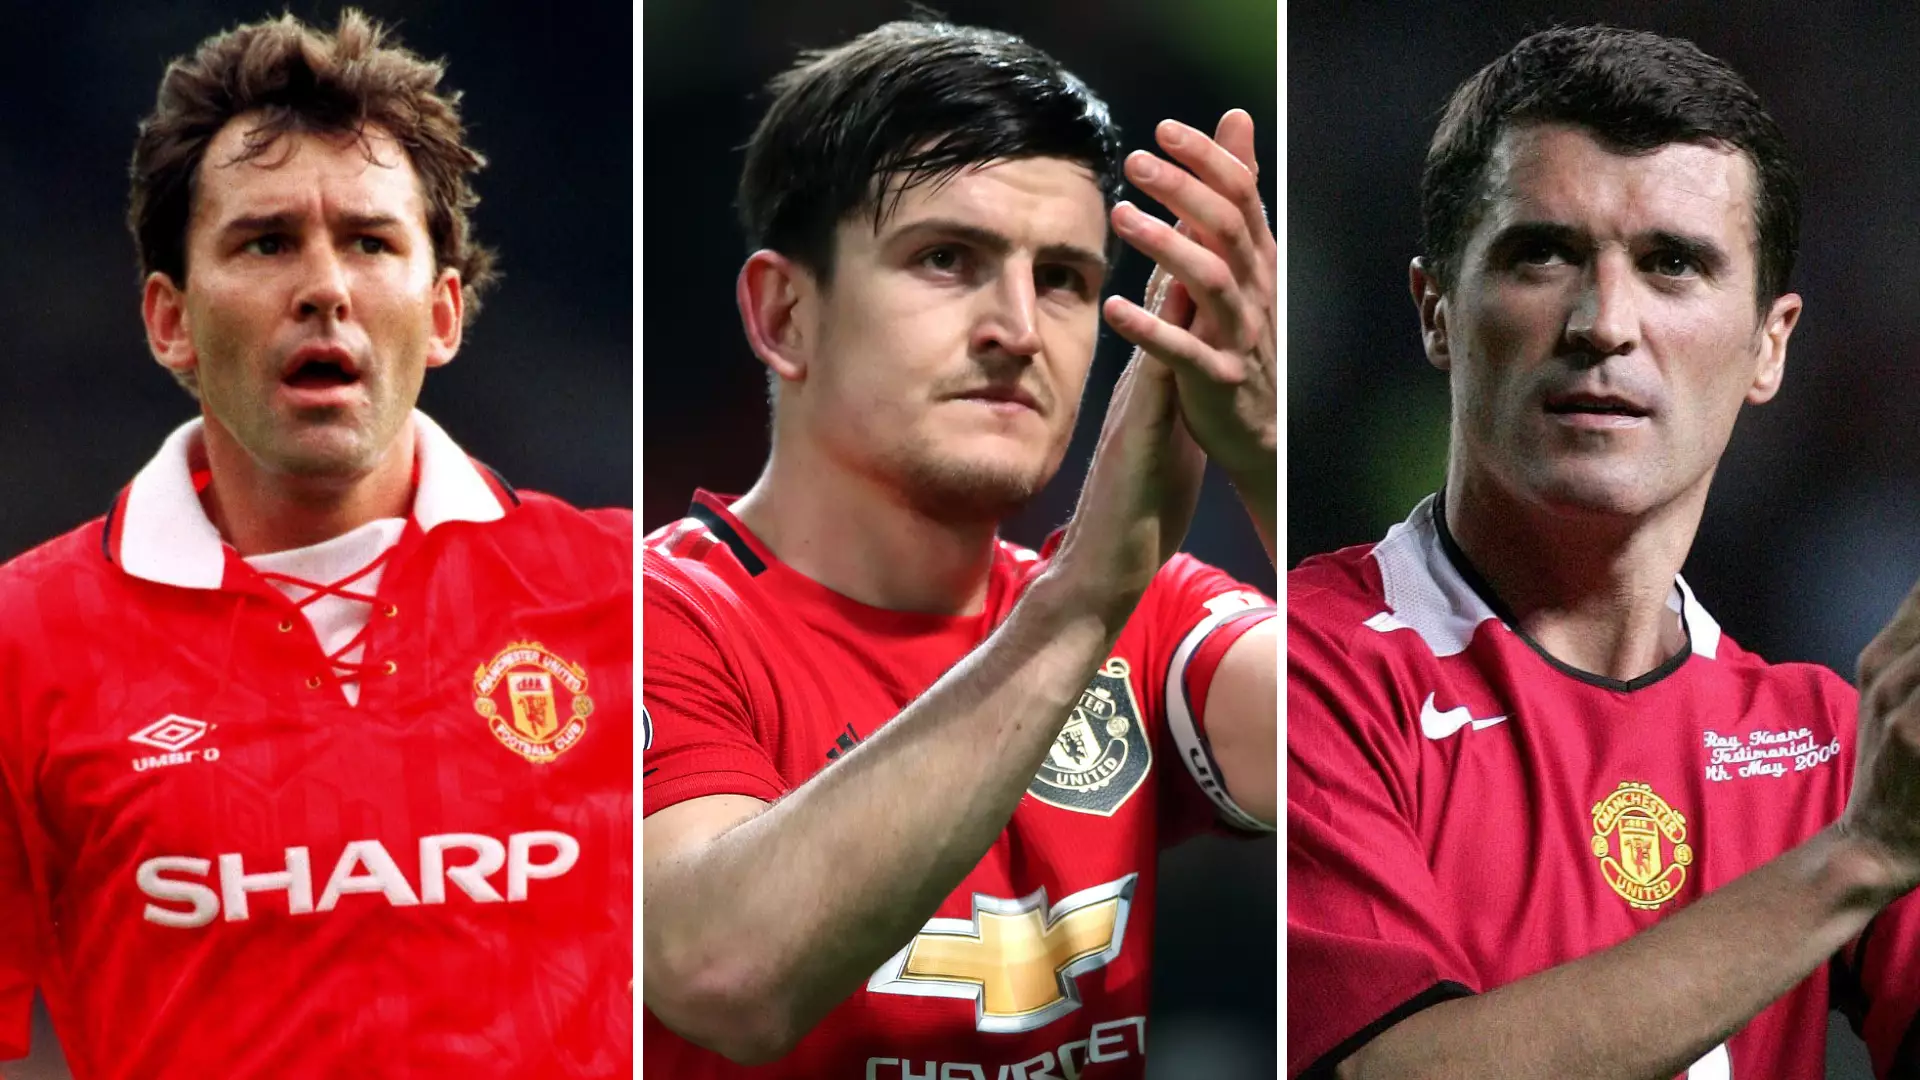 'Manchester United Captain Harry Maguire Doesn’t Inspire Like Roy Keane Or Bryan Robson'